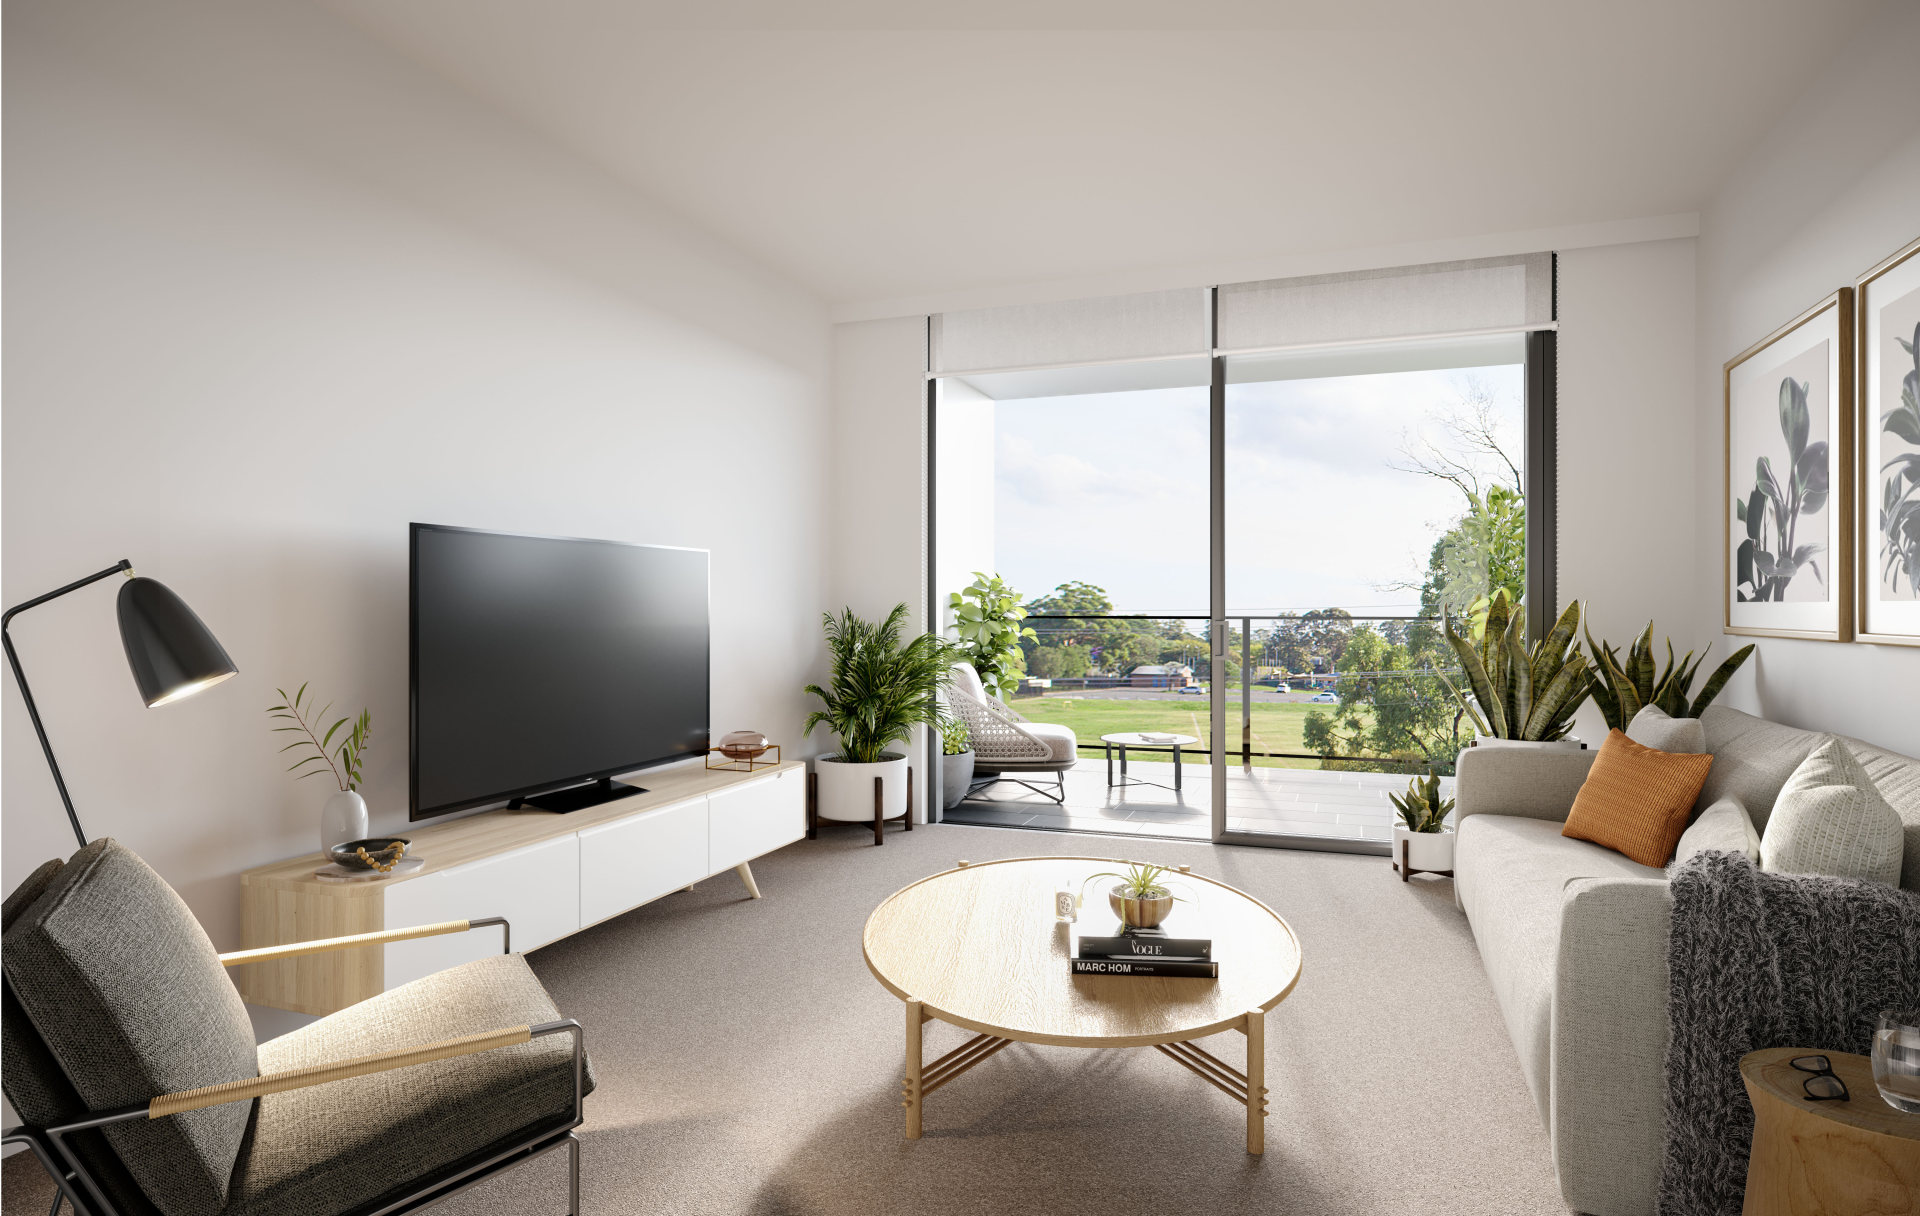 The Emerald-Campbelltown - 30-36 Warby ST, Campbelltown, NSW 2560